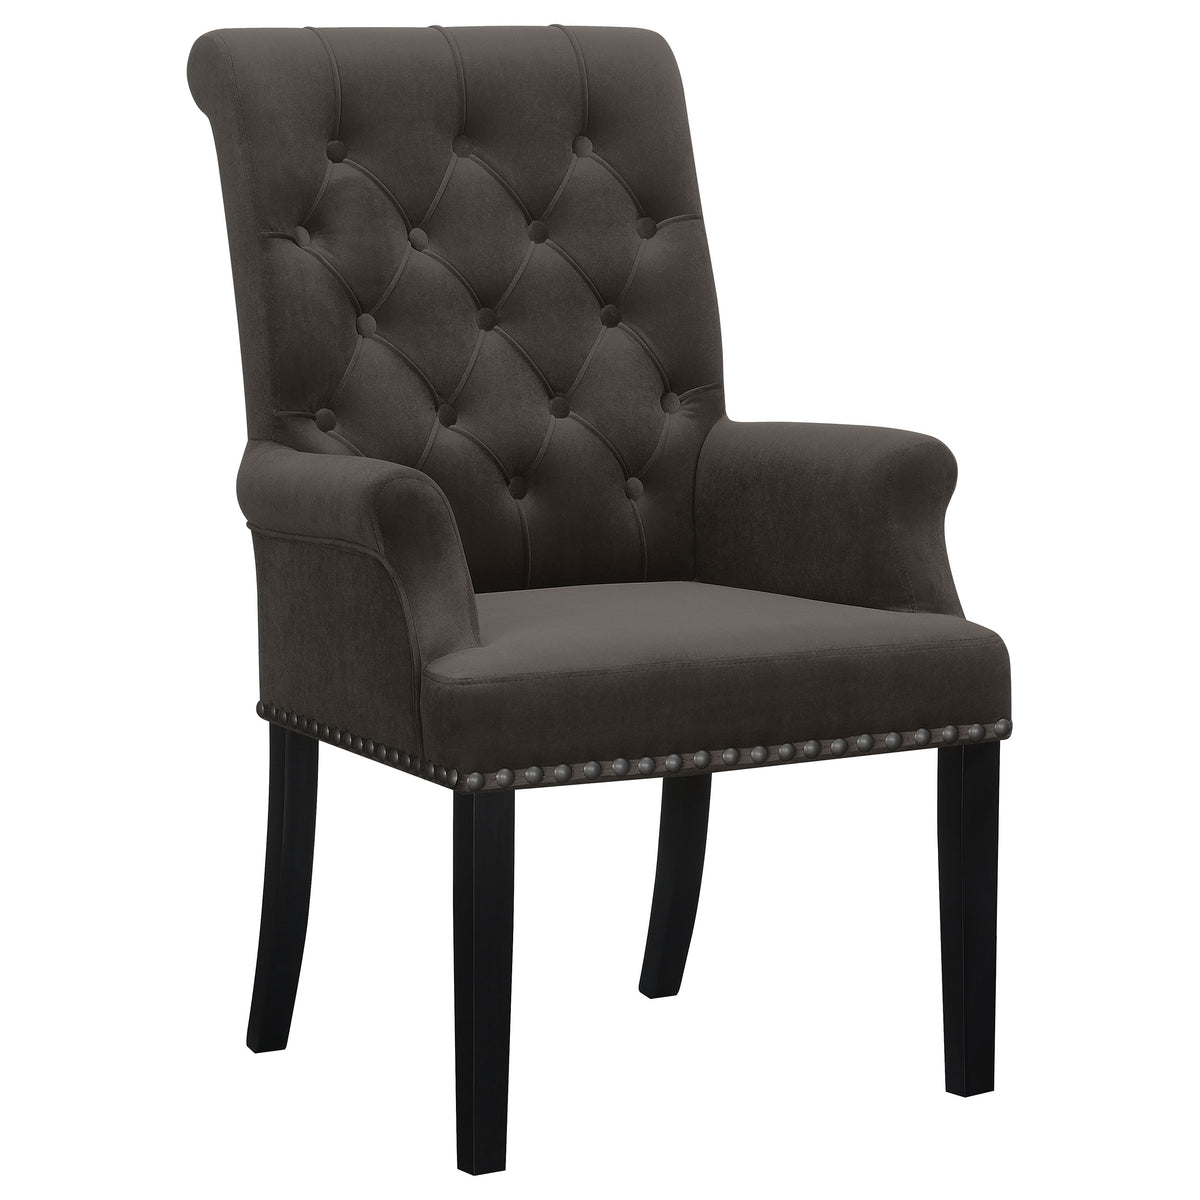 Alana Upholstered Tufted Arm Chair with Nailhead Trim Alana Upholstered Tufted Arm Chair with Nailhead Trim Half Price Furniture